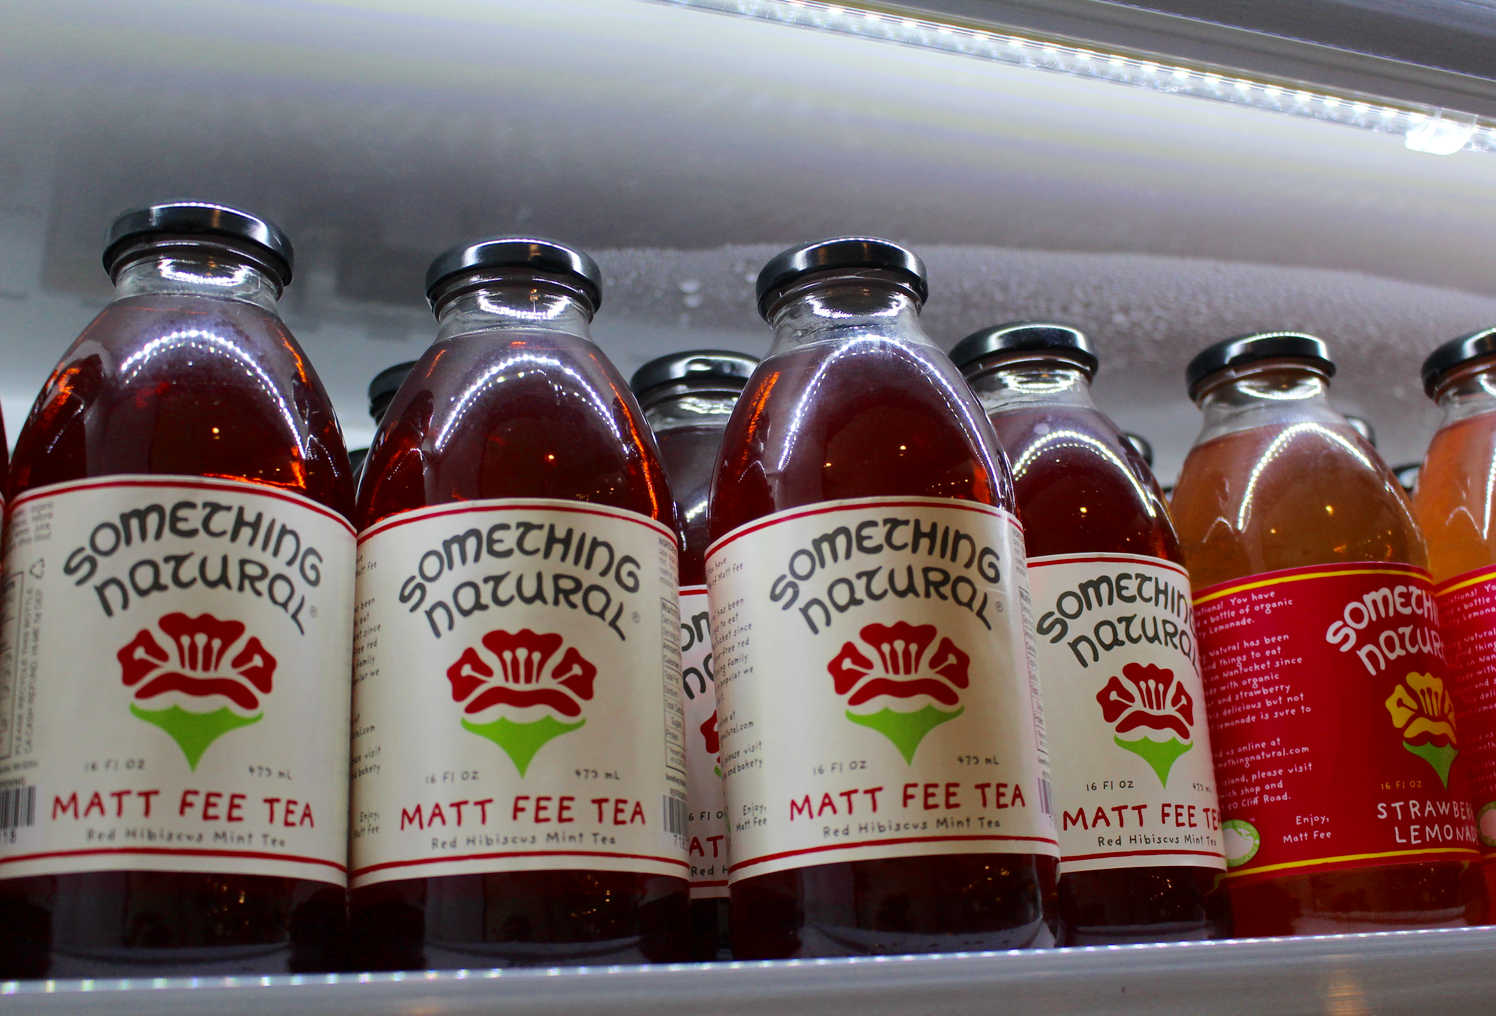 Matt Fee Tea features hibiscus and mint and is a staple of Something Natural's beverage display.